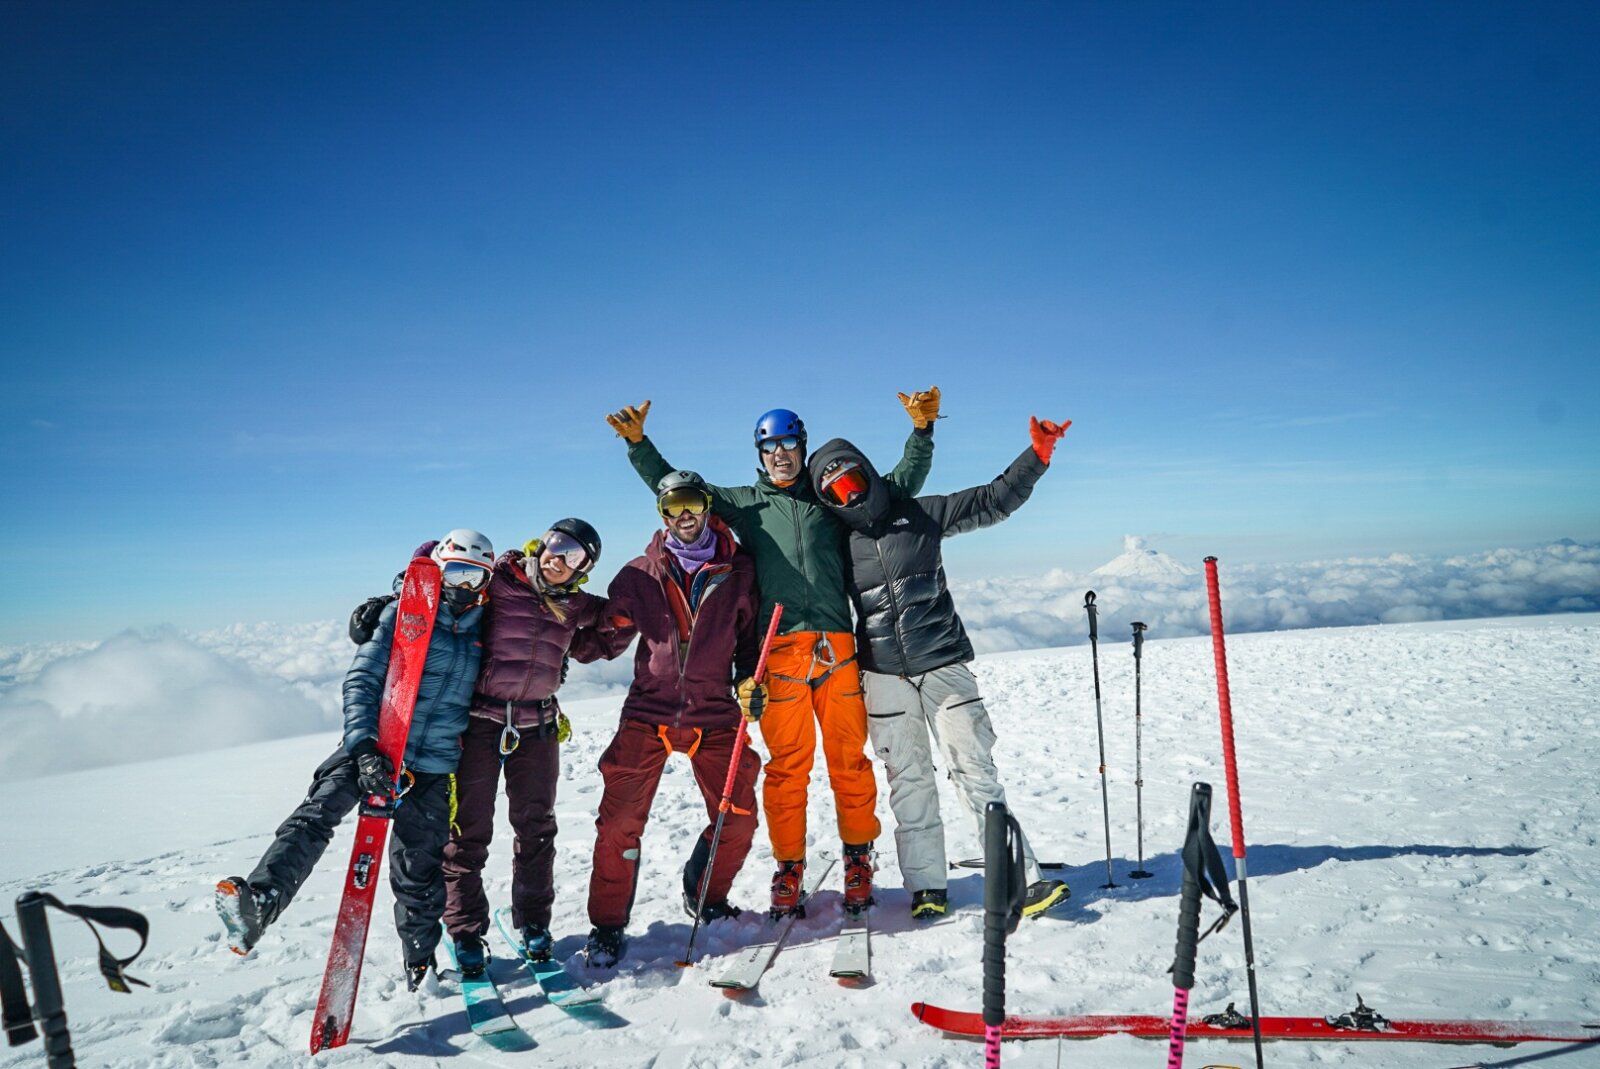 Ski mountaineers on the summit of a volcano in Ecuador with Alpenglow Expeditions' professionally guided ski mountaineering trip to Ecuador's Ring Of Fire.